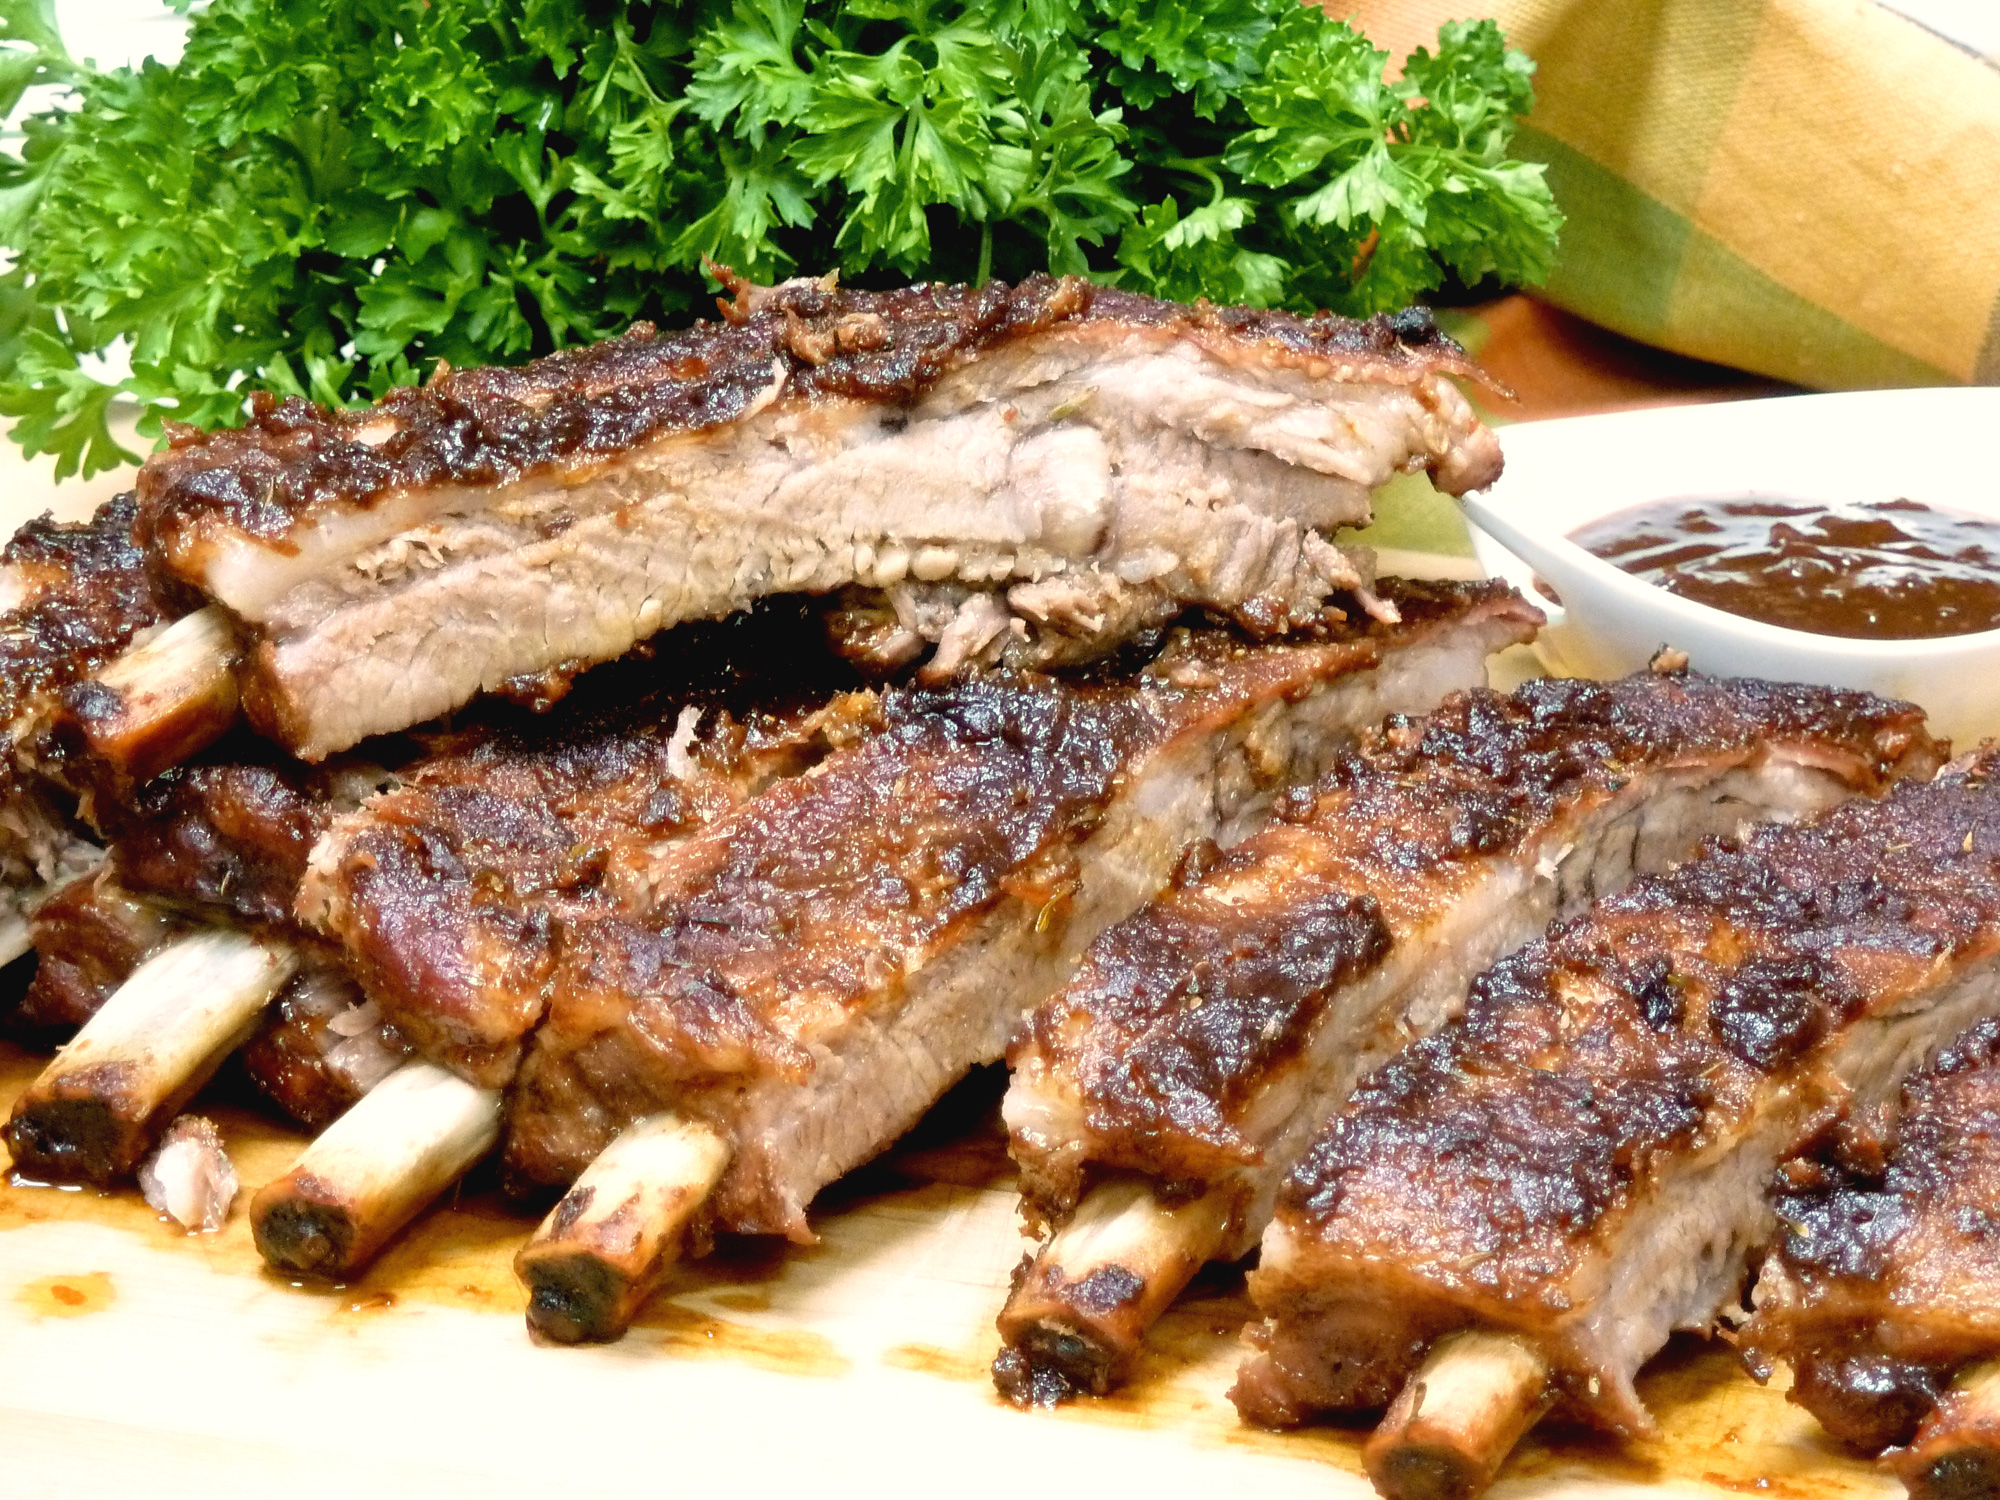 Check out these lip-smacking, juicy ribs after slicing. Drool!